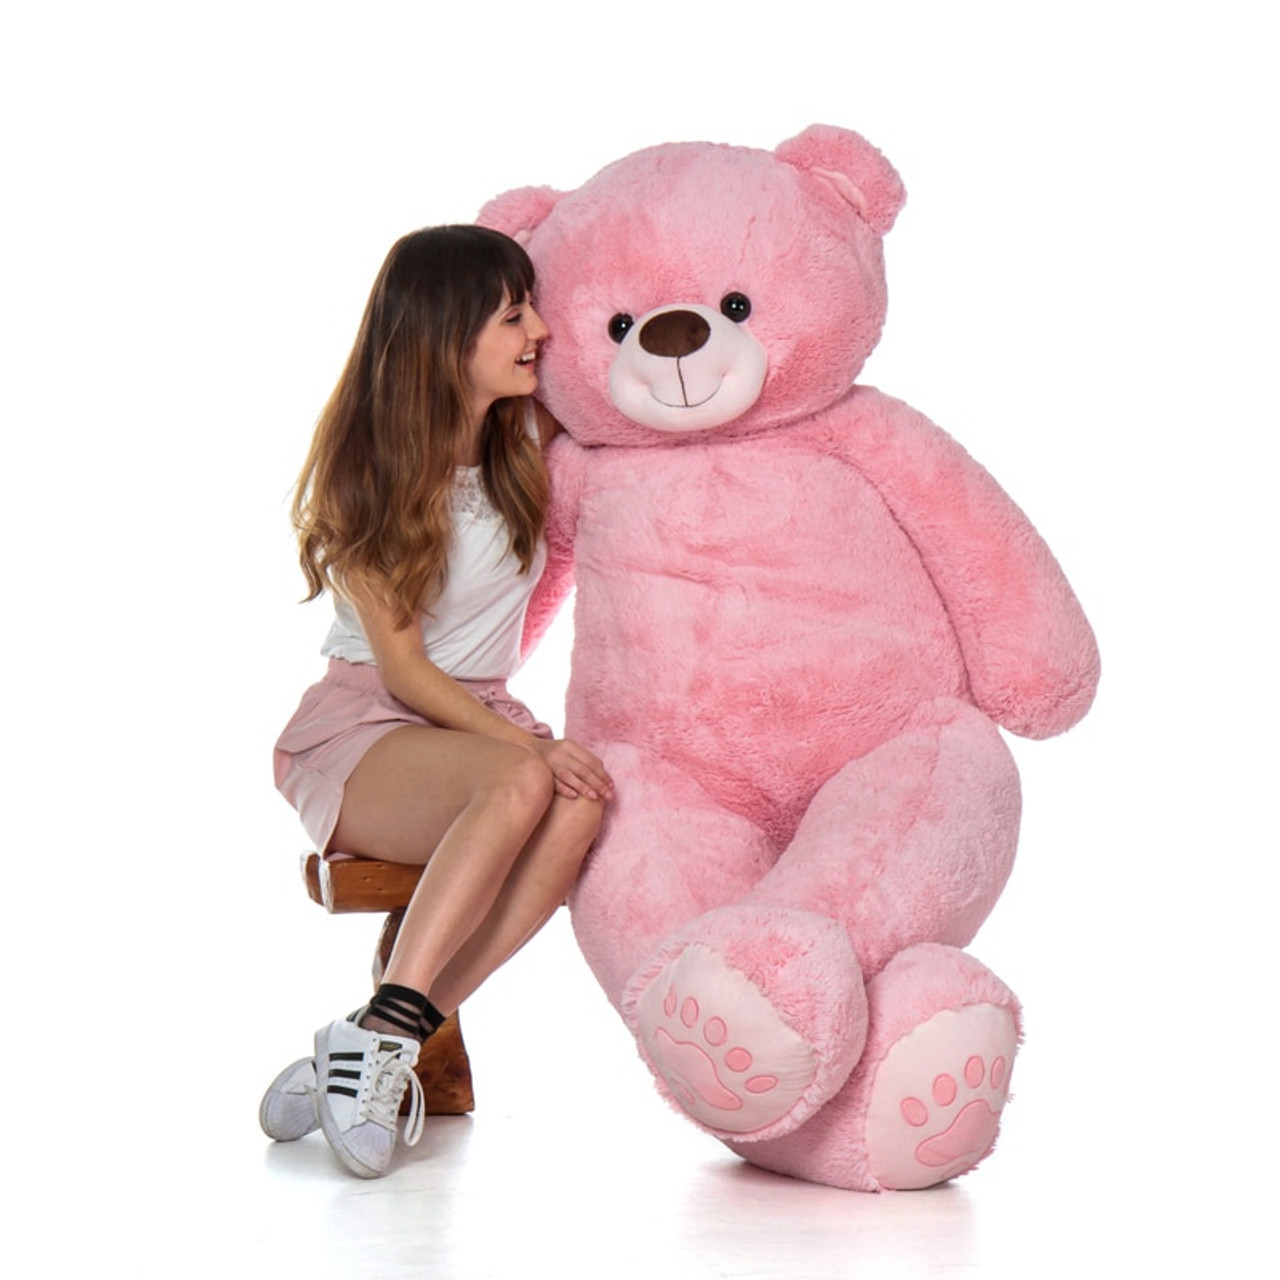 Super Soft Adorable Pink Teddy Bear - Life Size Giant Teddy Bear for Valentine's Day